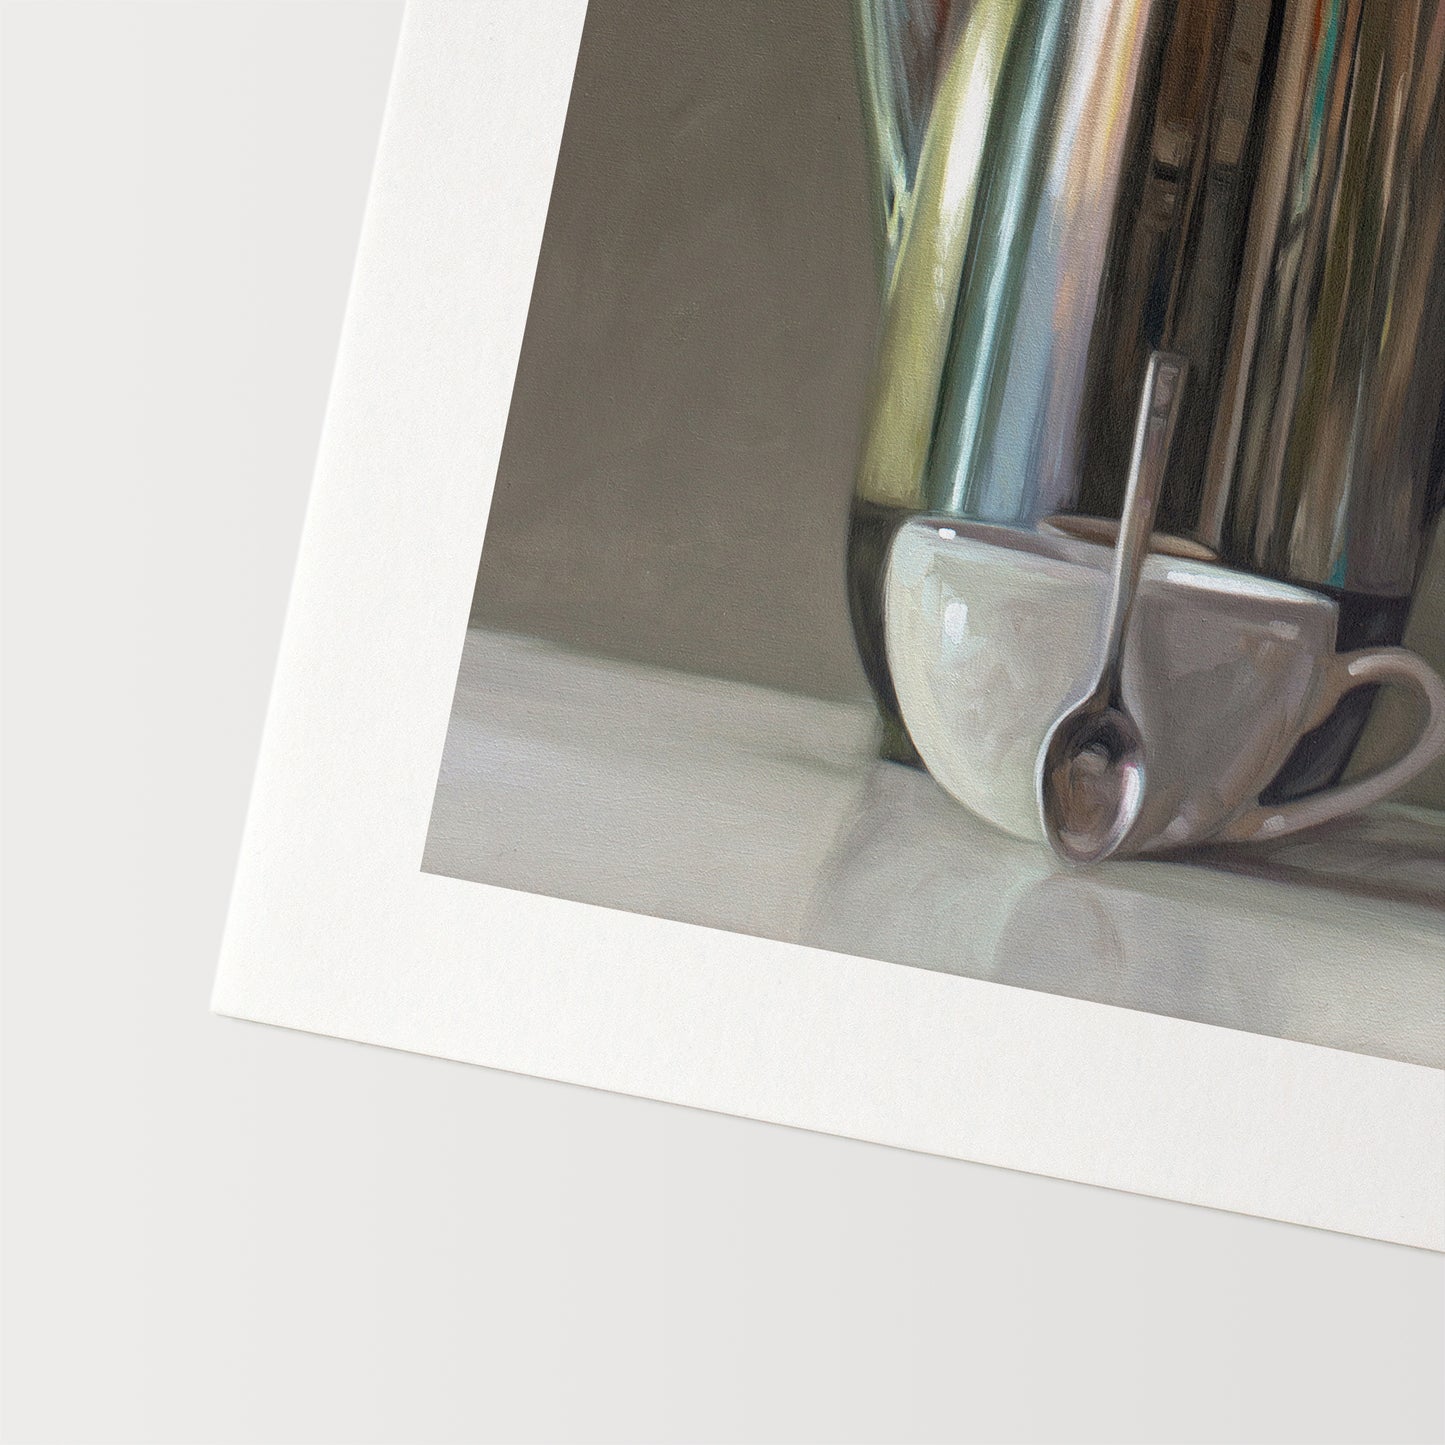 This artwork features a reflective percolator, porcelain coffee cup and small spoon resting on a light reflective surface with neutral grey tones.